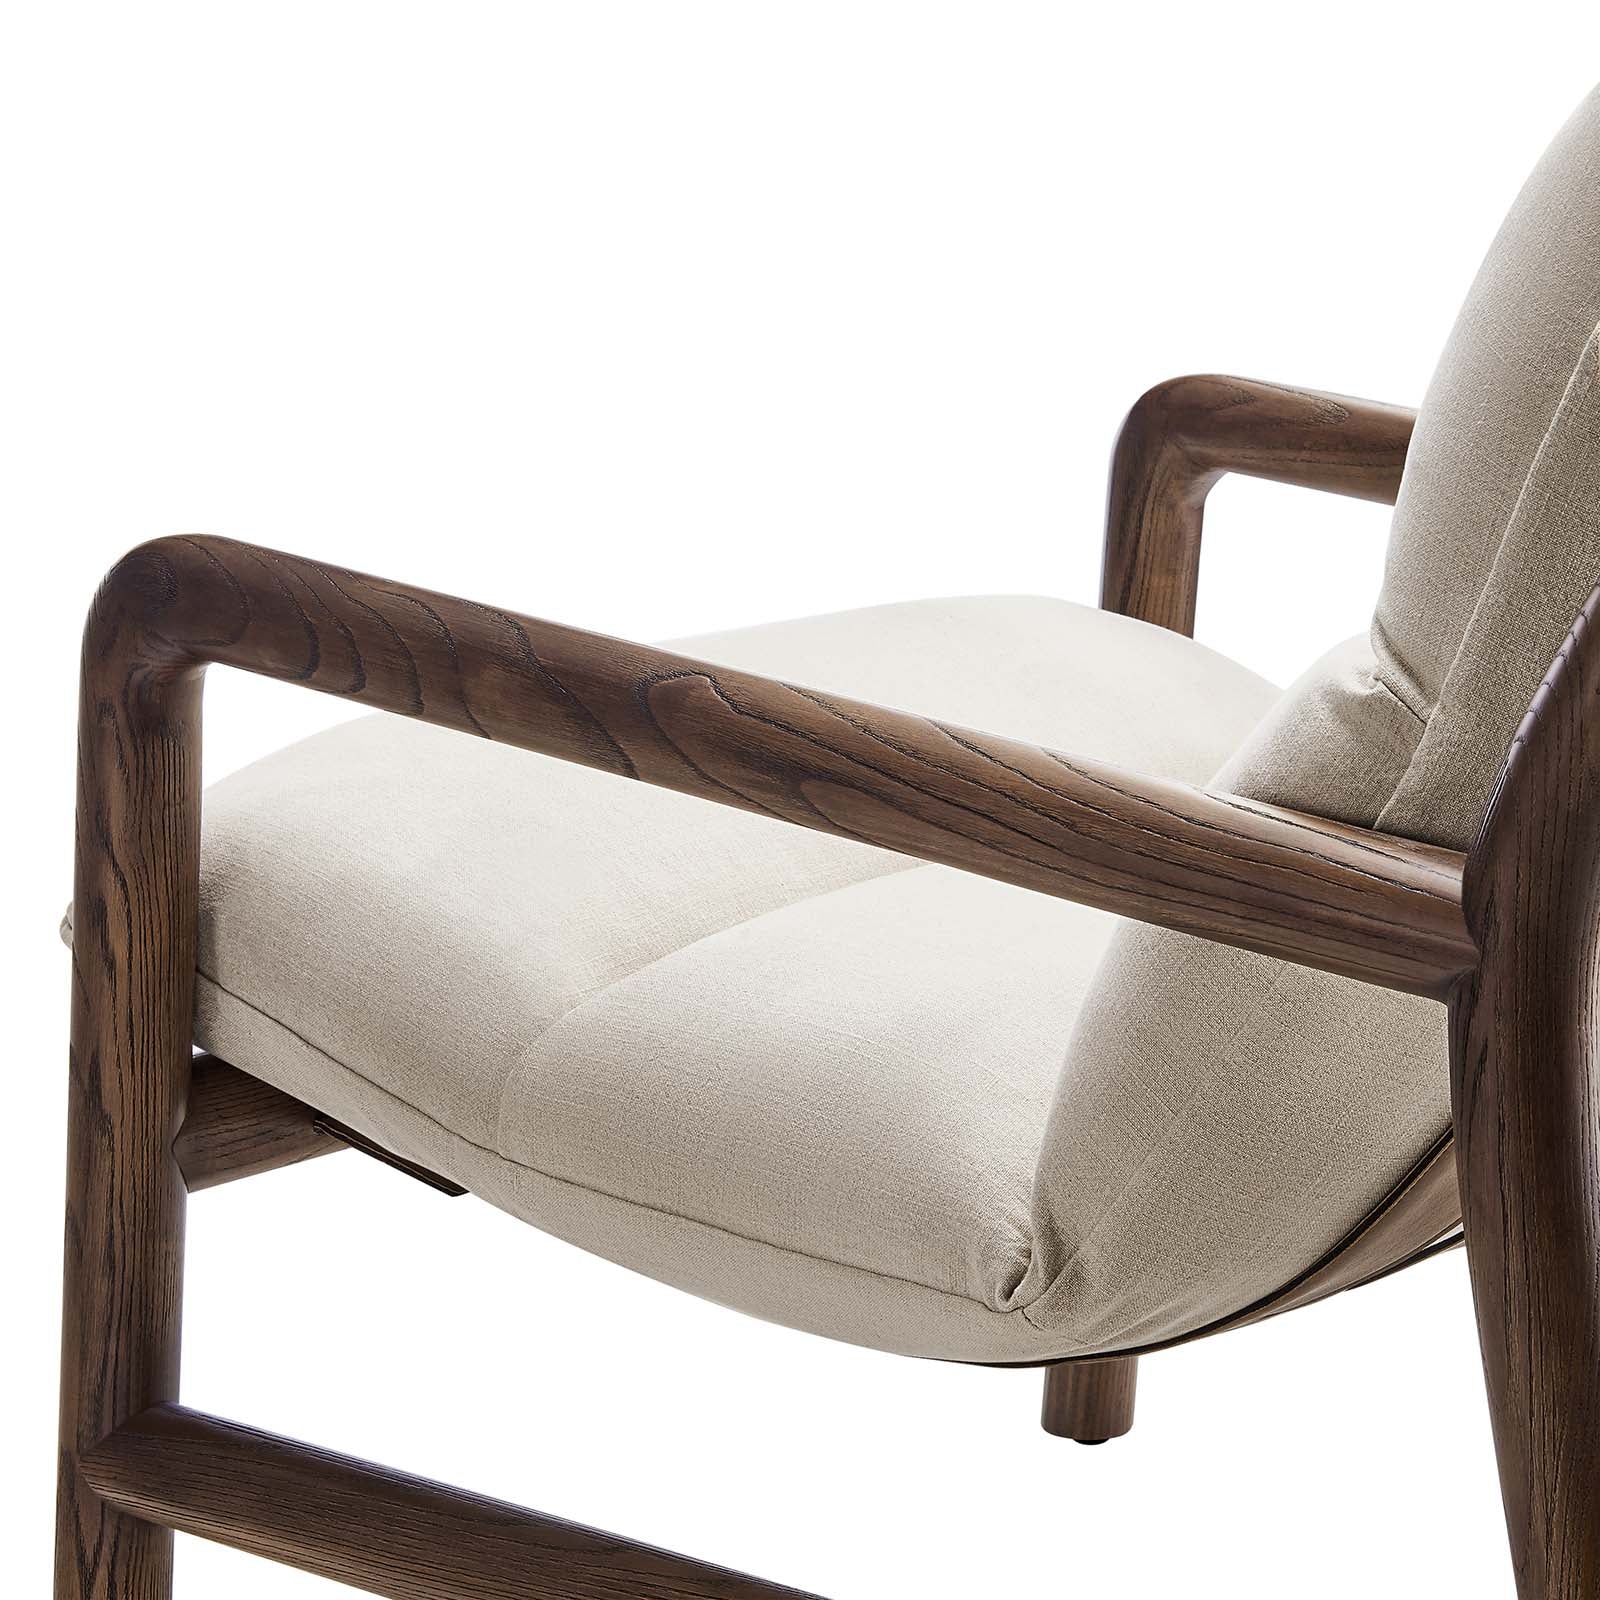 PAX WOOD SLING CHAIR